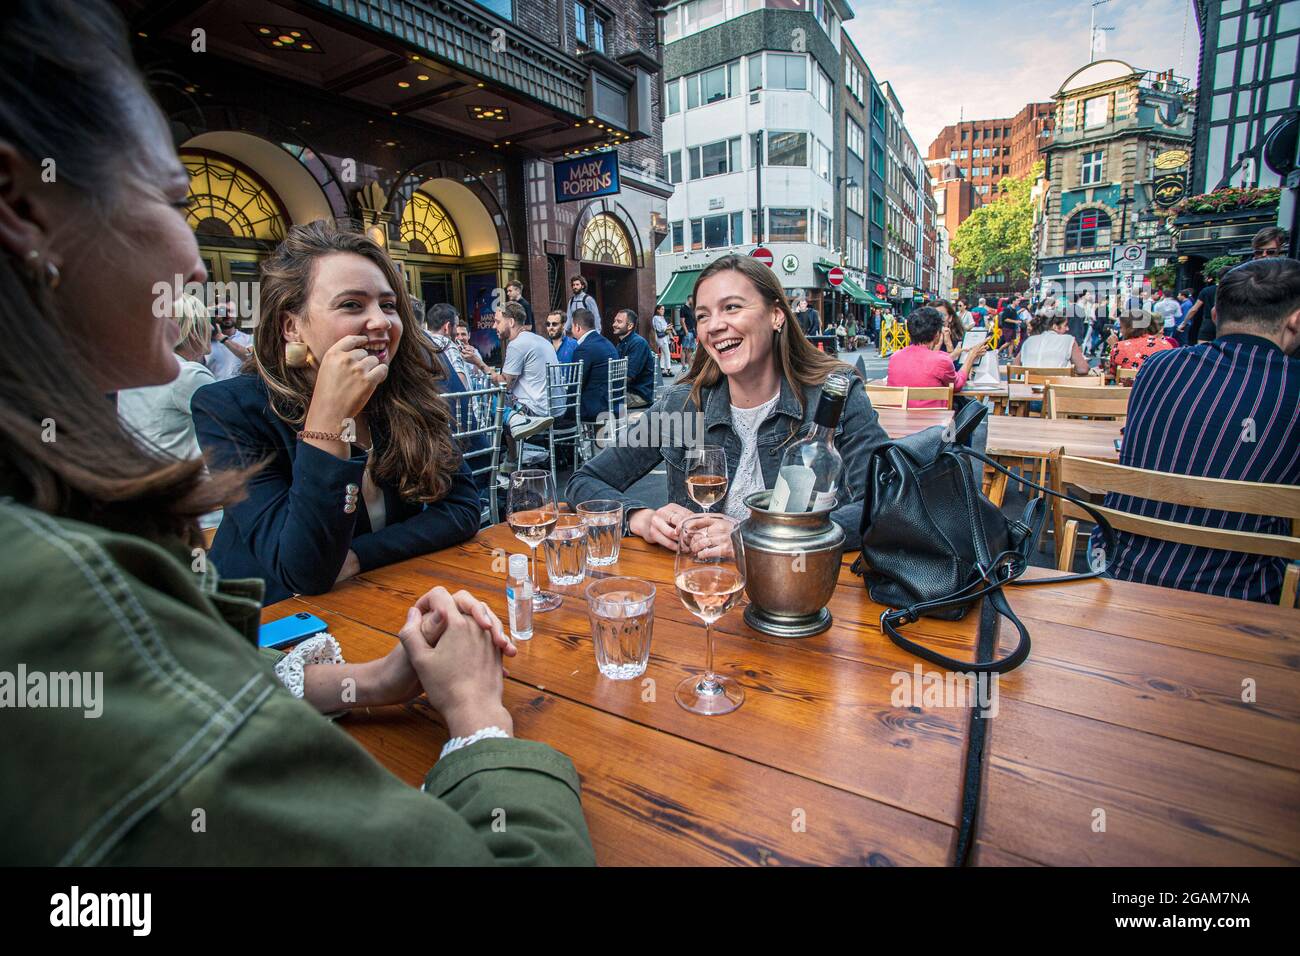 Young females celebrating 'freedom day' ending over a year of COVID-19 lockdown restrictions in England people drinking on tables placed outside on Ol Stock Photo